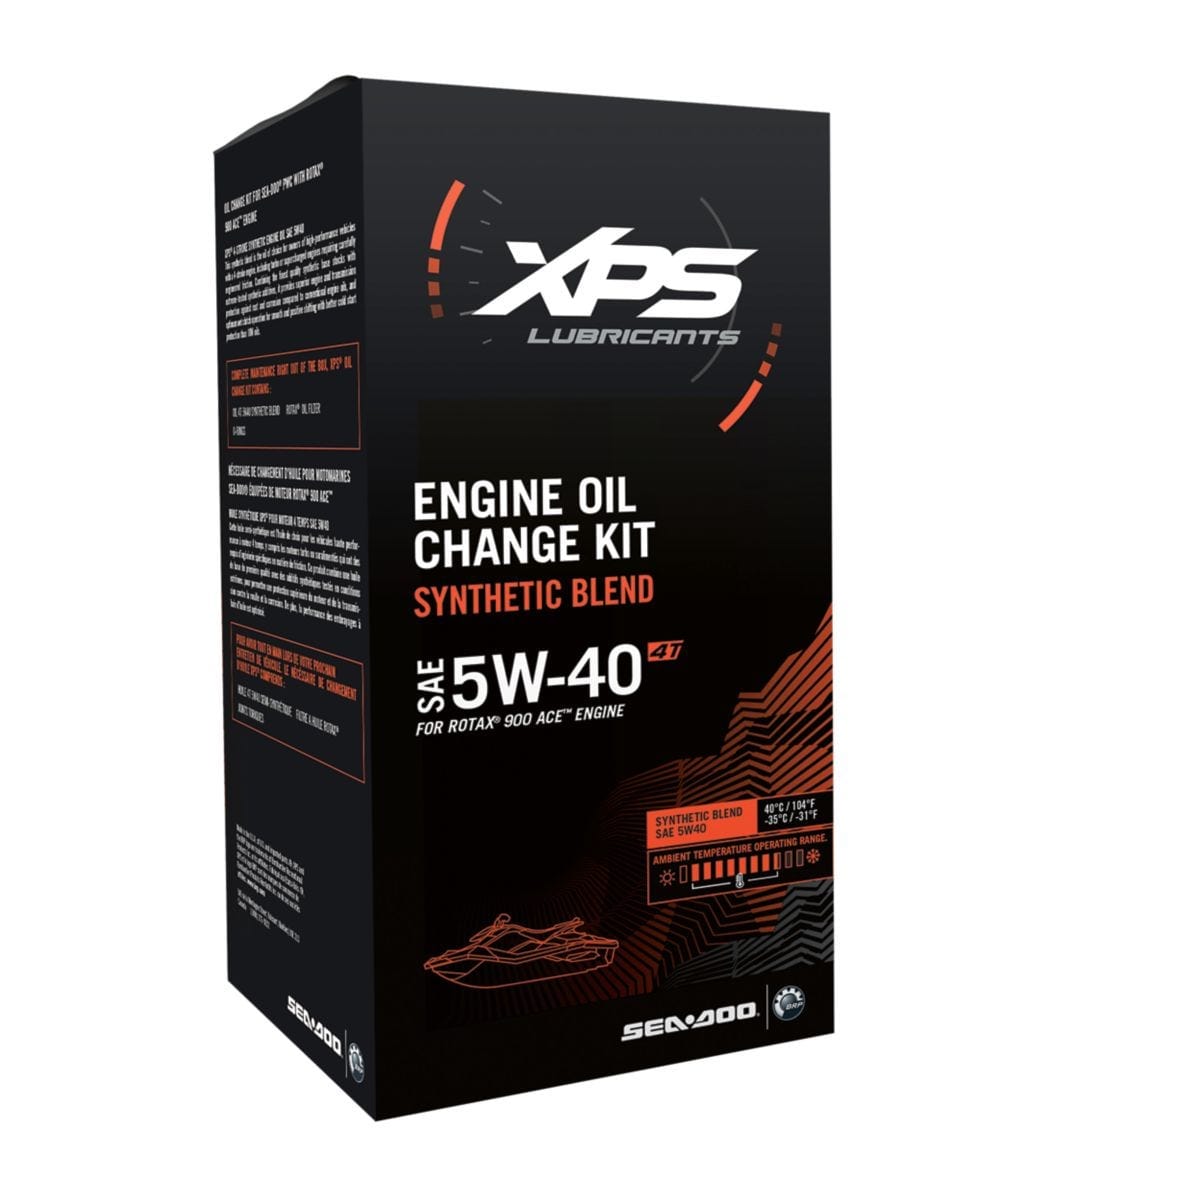 4T 5W-40 Synthetic Blend Oil Change Kit for Rotax 900 ACE engine